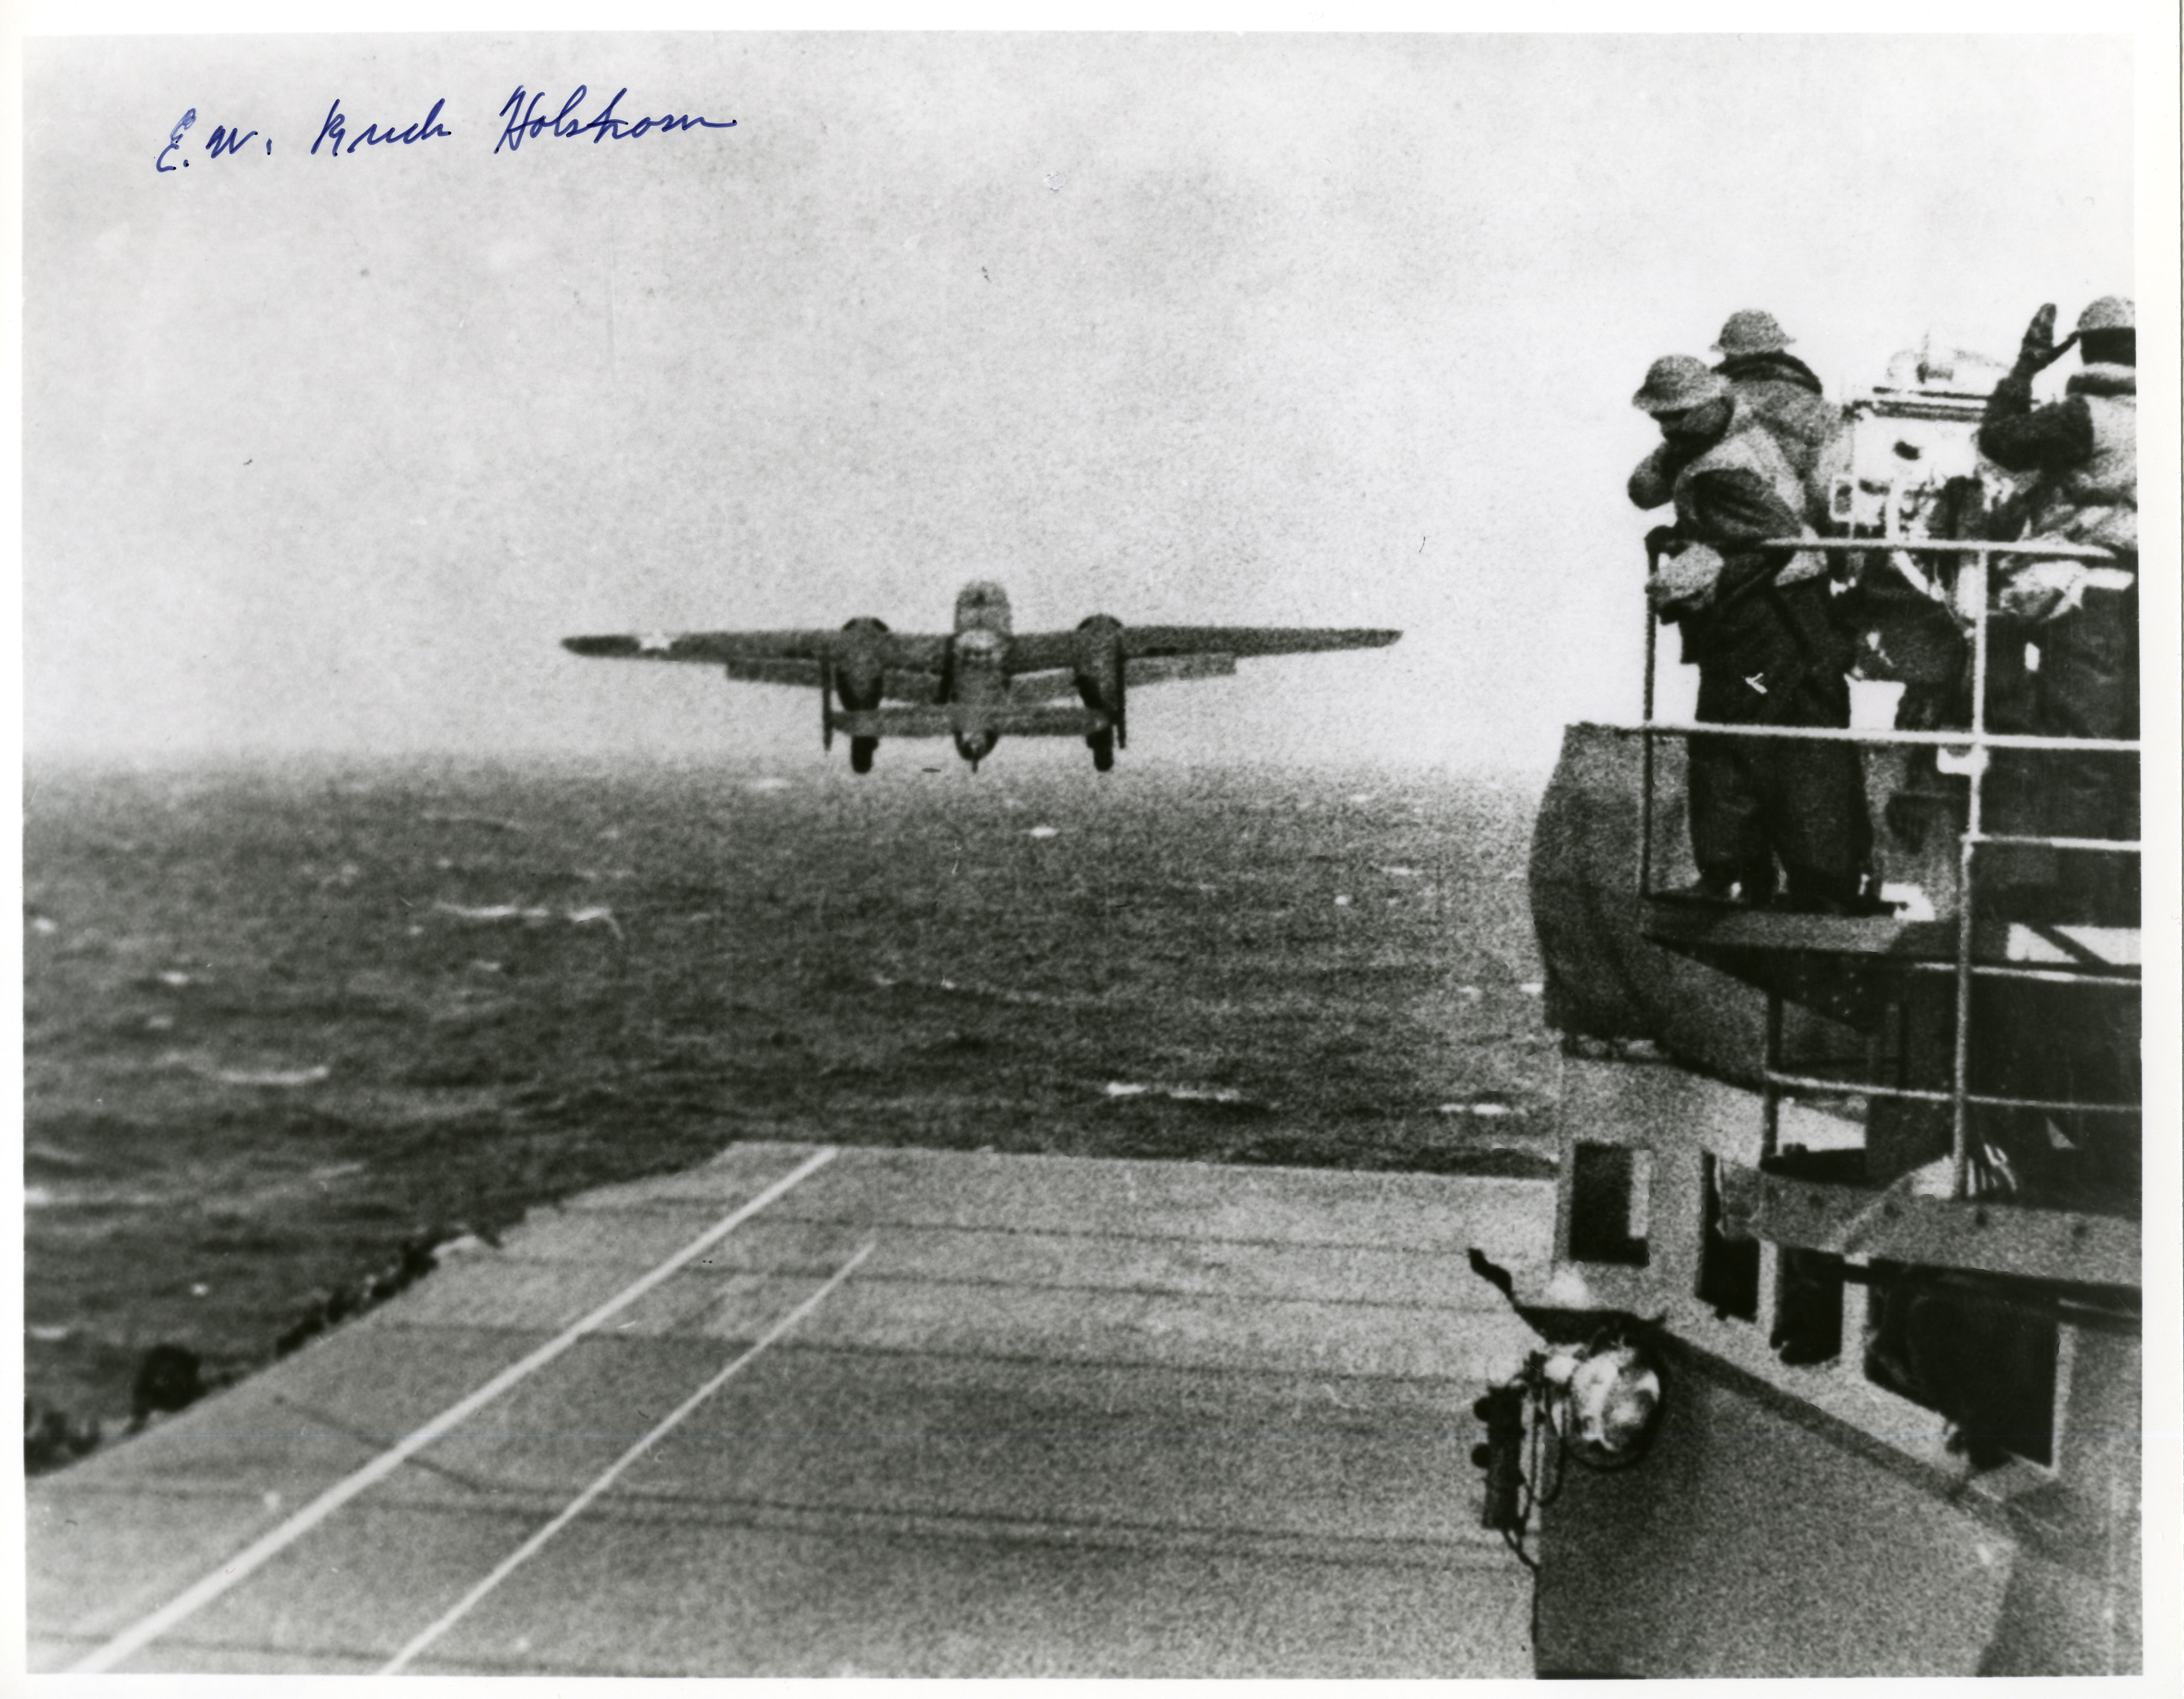 B-25 USAAF bomber taking off USS Hornet aircraft carrier to bomb Tokyo, Japan (signed by General Holstrom)